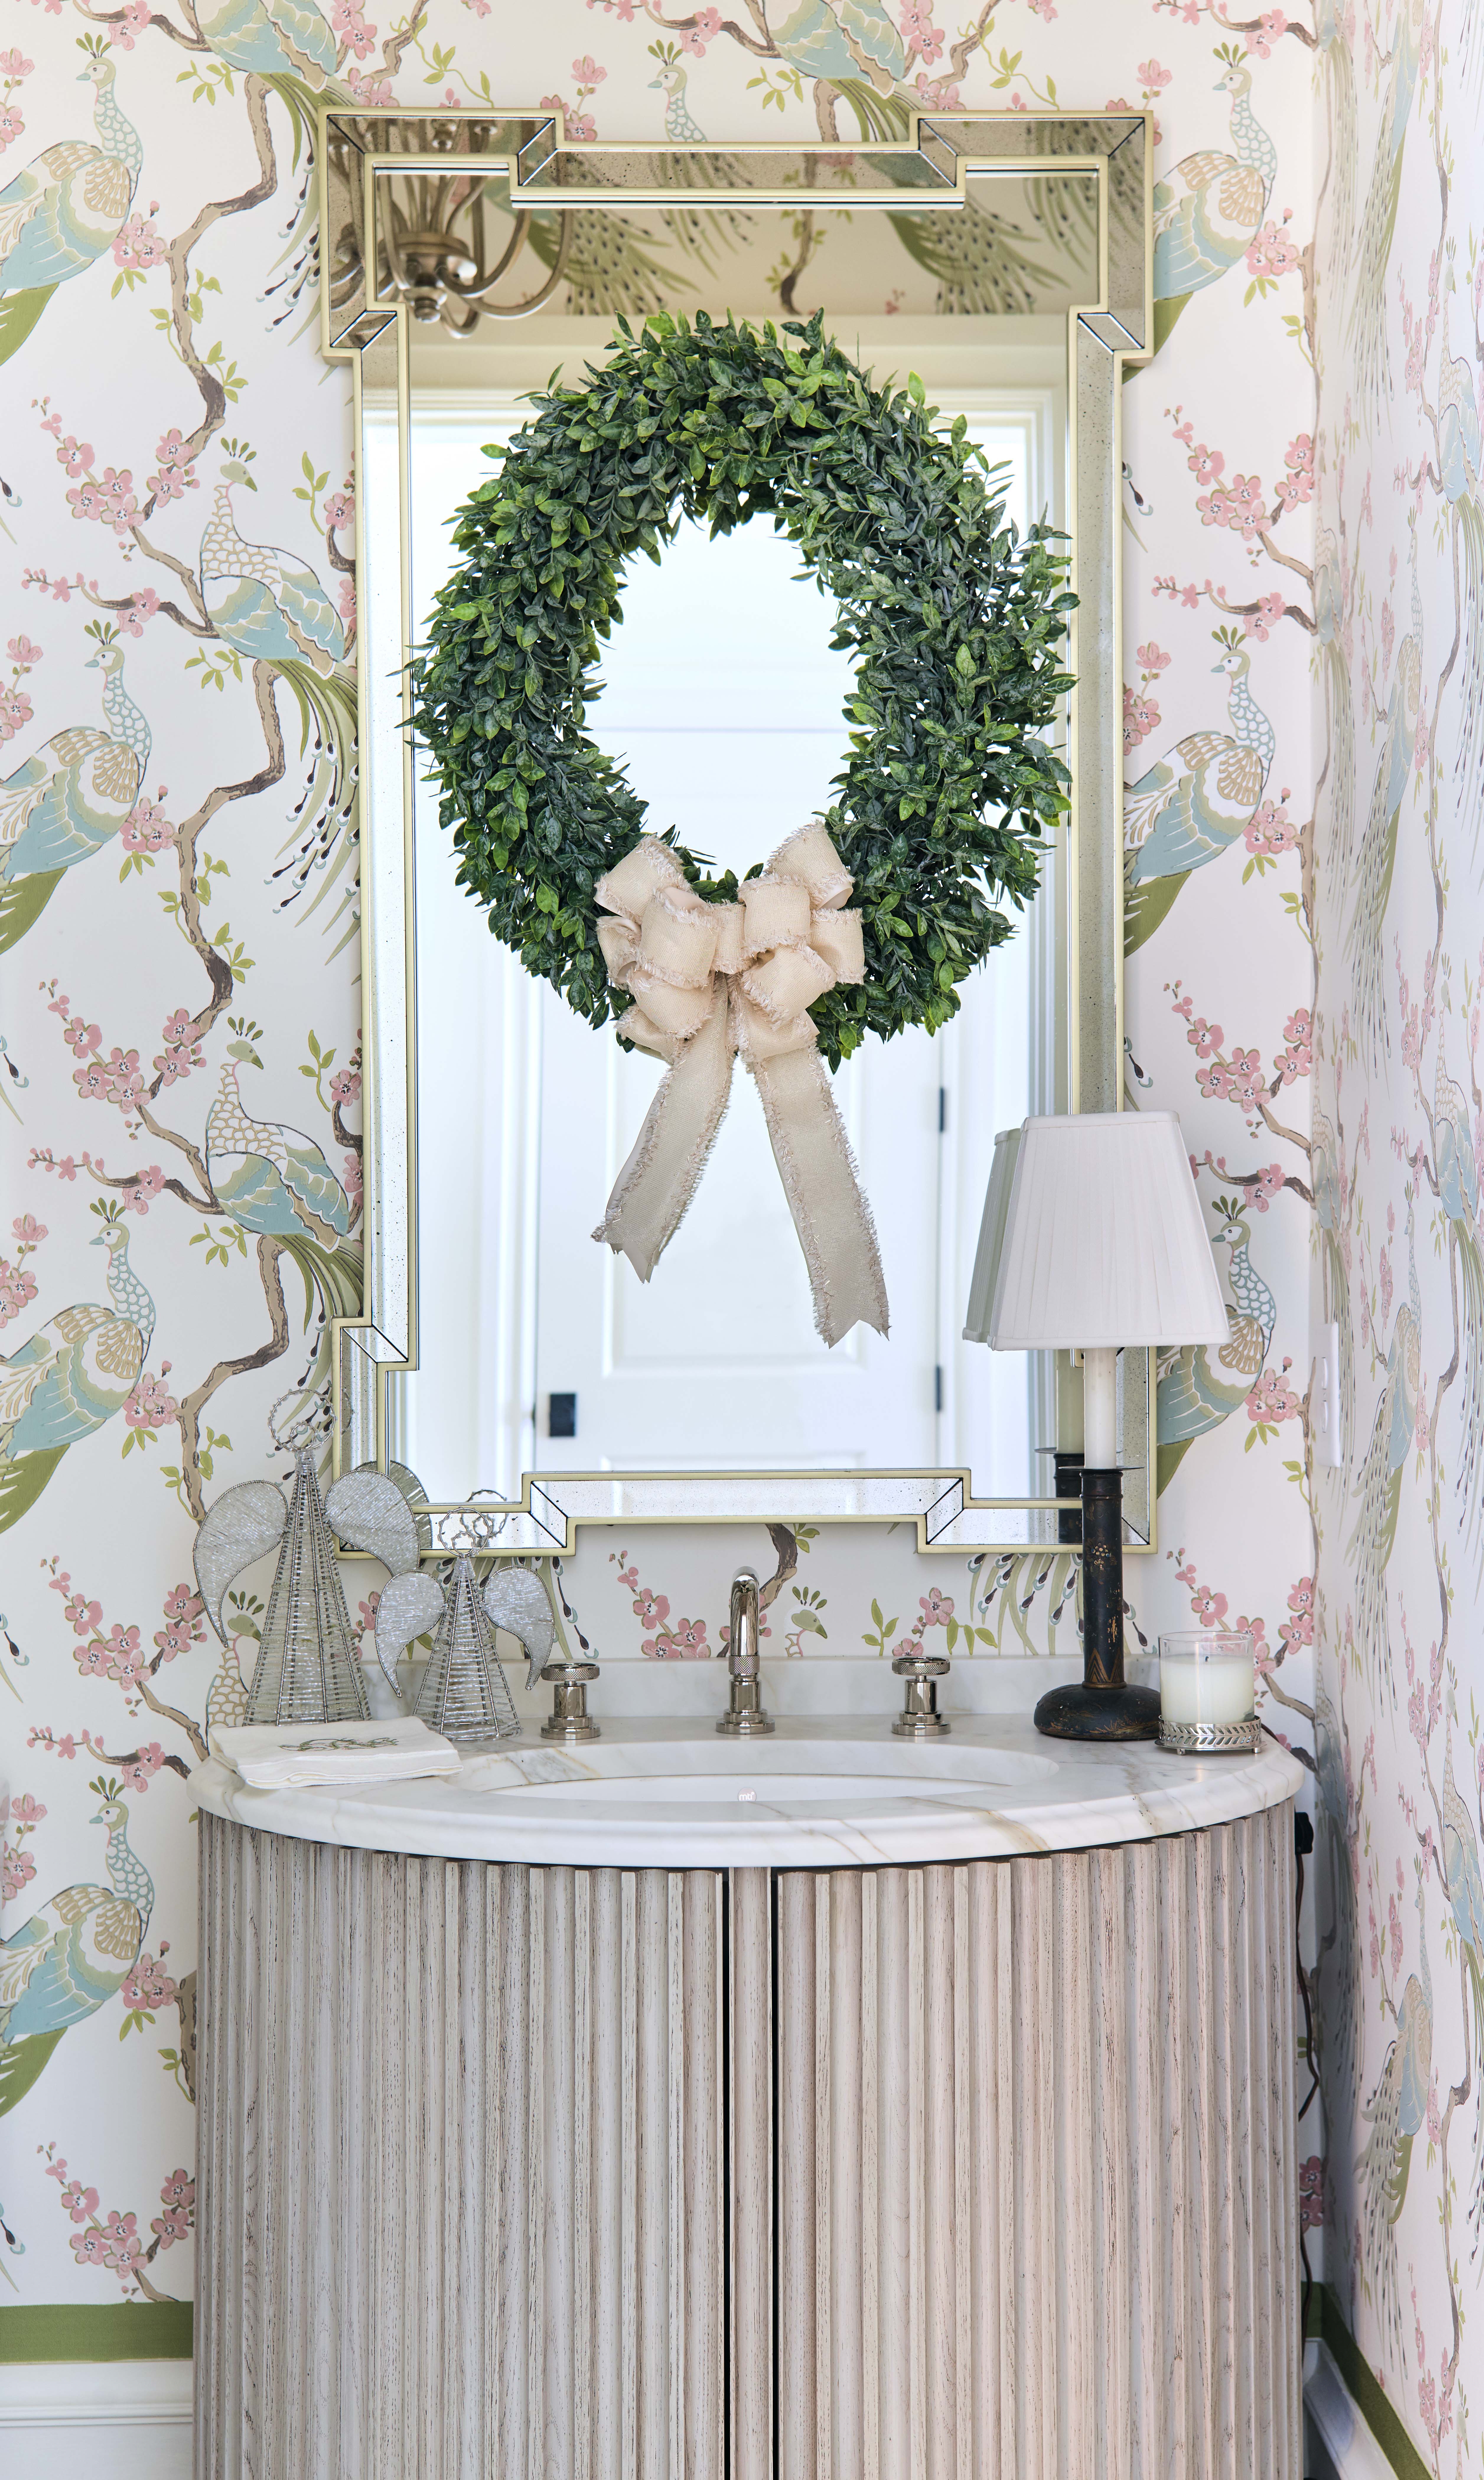 Ground Floor Powder Design by Susan Brady Interiors at the Home for the Holidays Designer Showhouse on Stuffy Muffy.